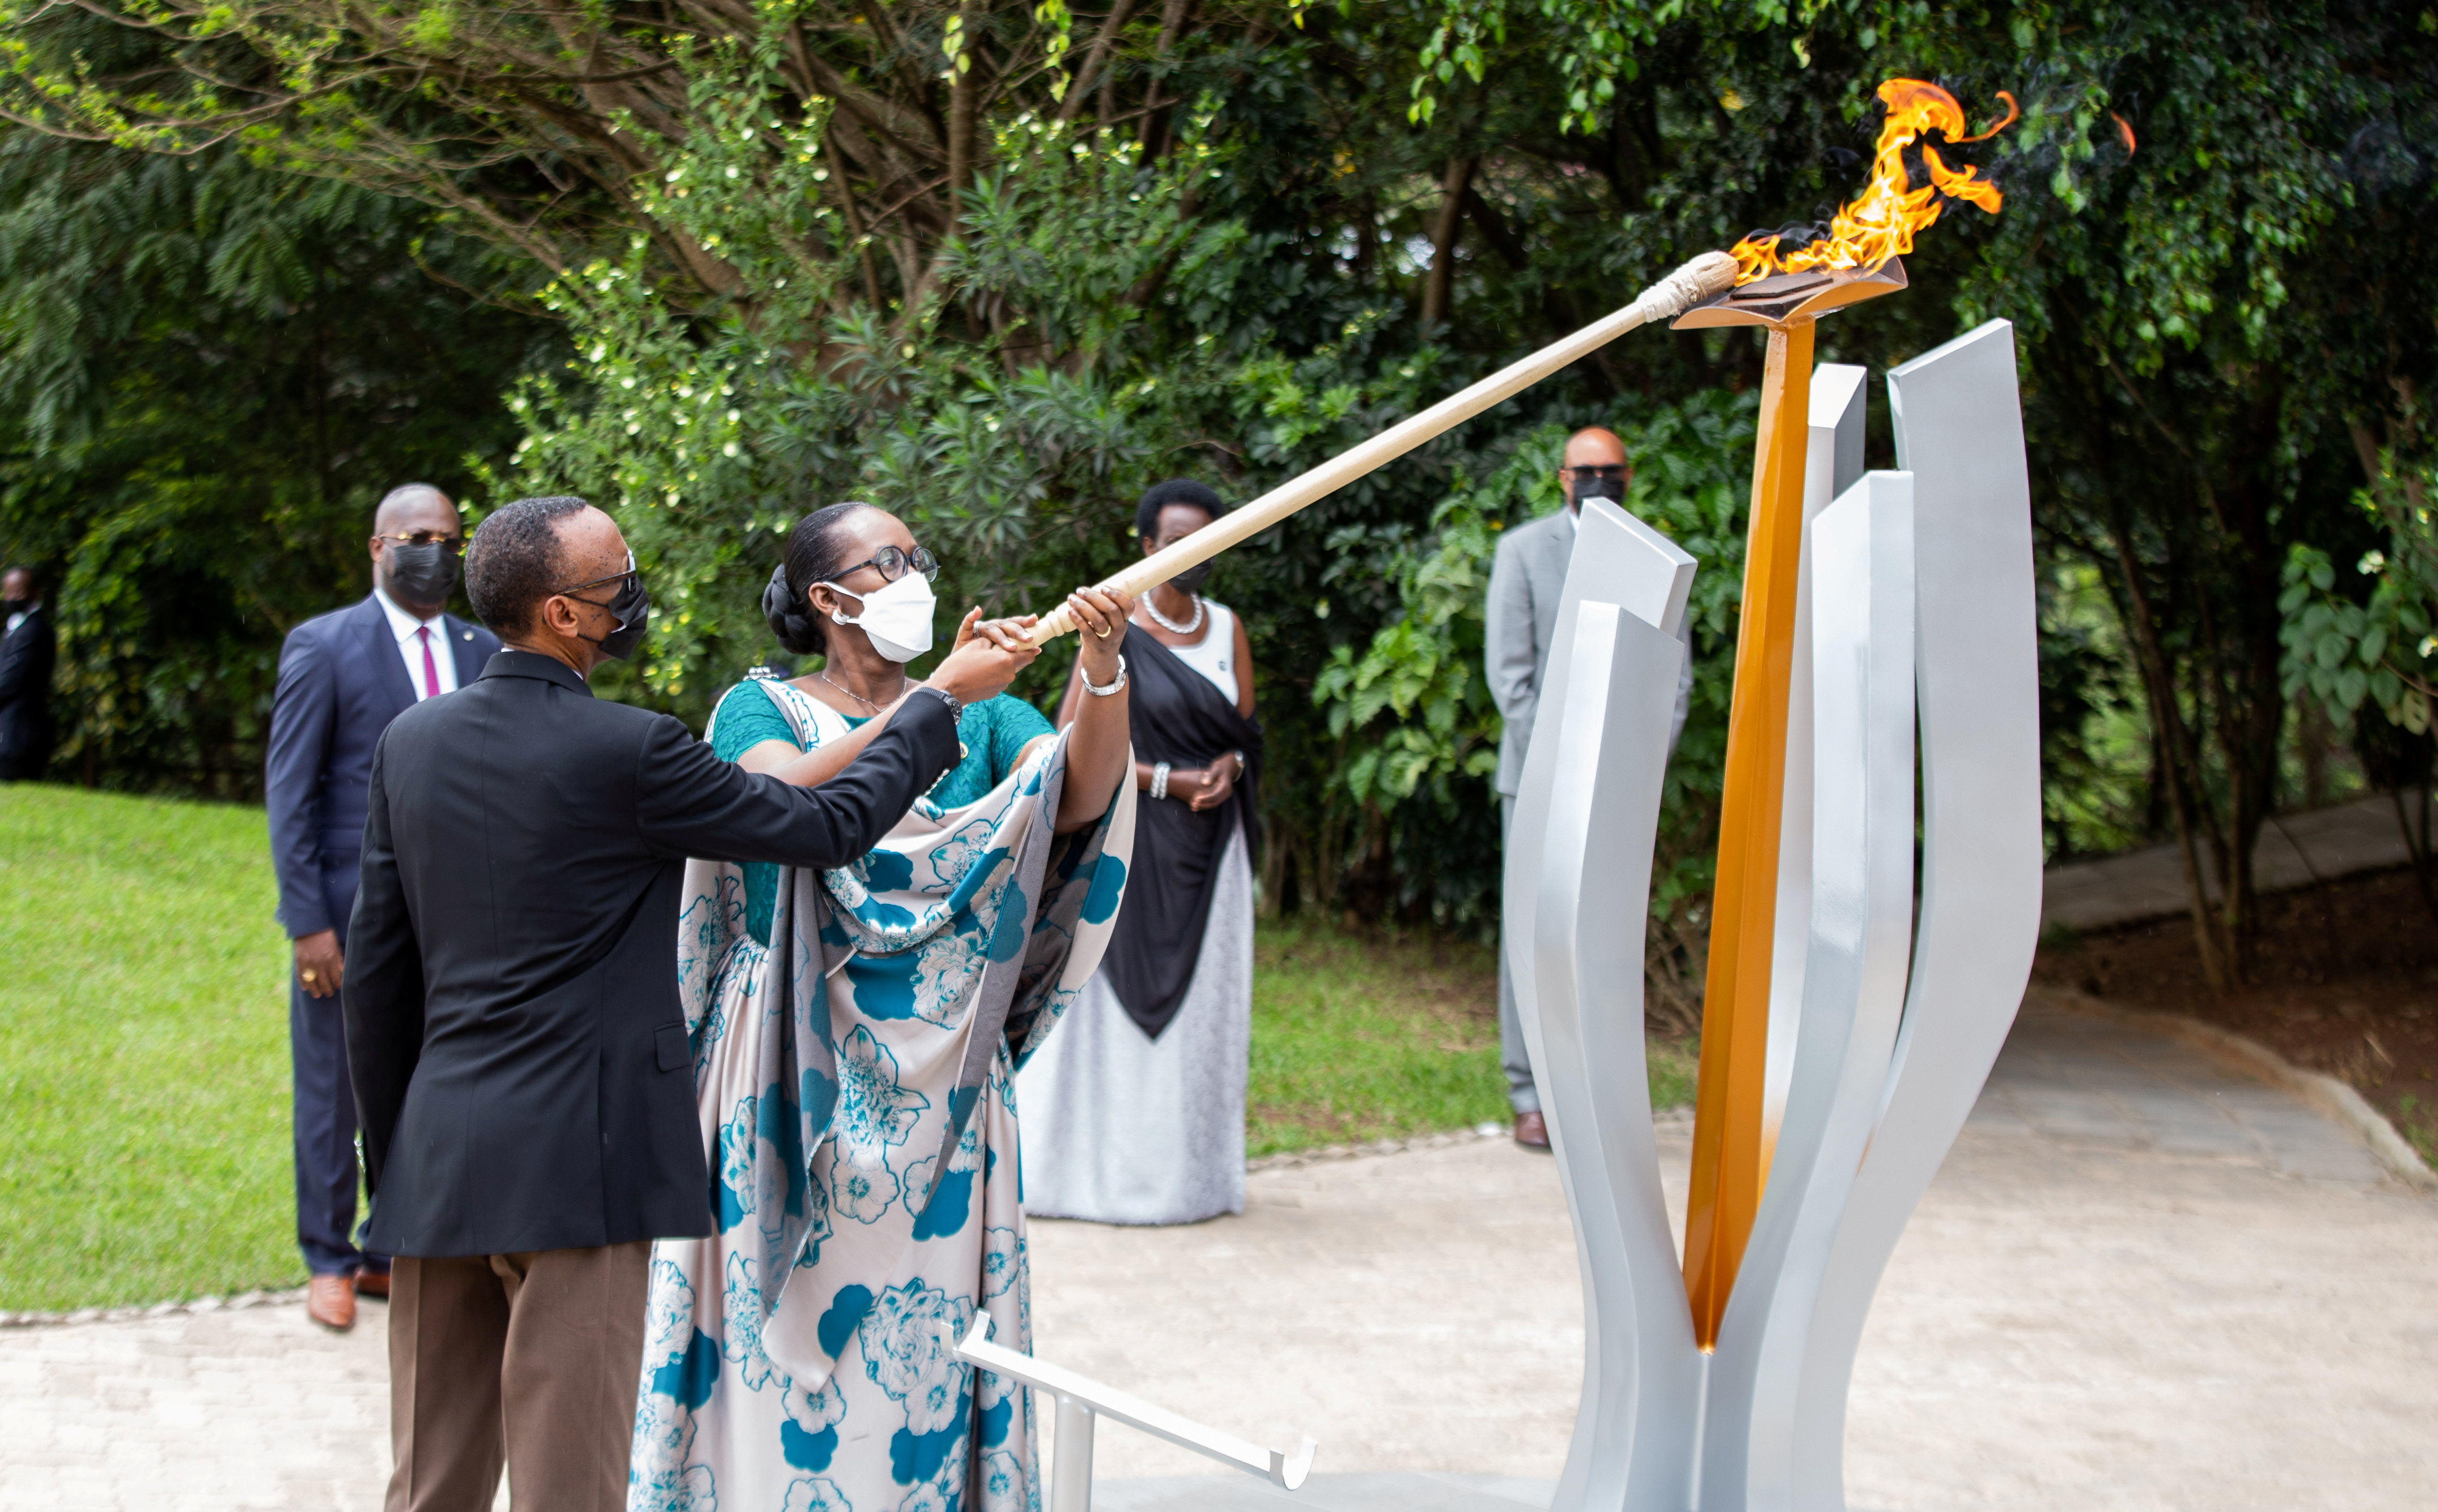 Commemoration of the 1994 Genocide, at the Kigali Genocide Memorial Center in Kigali